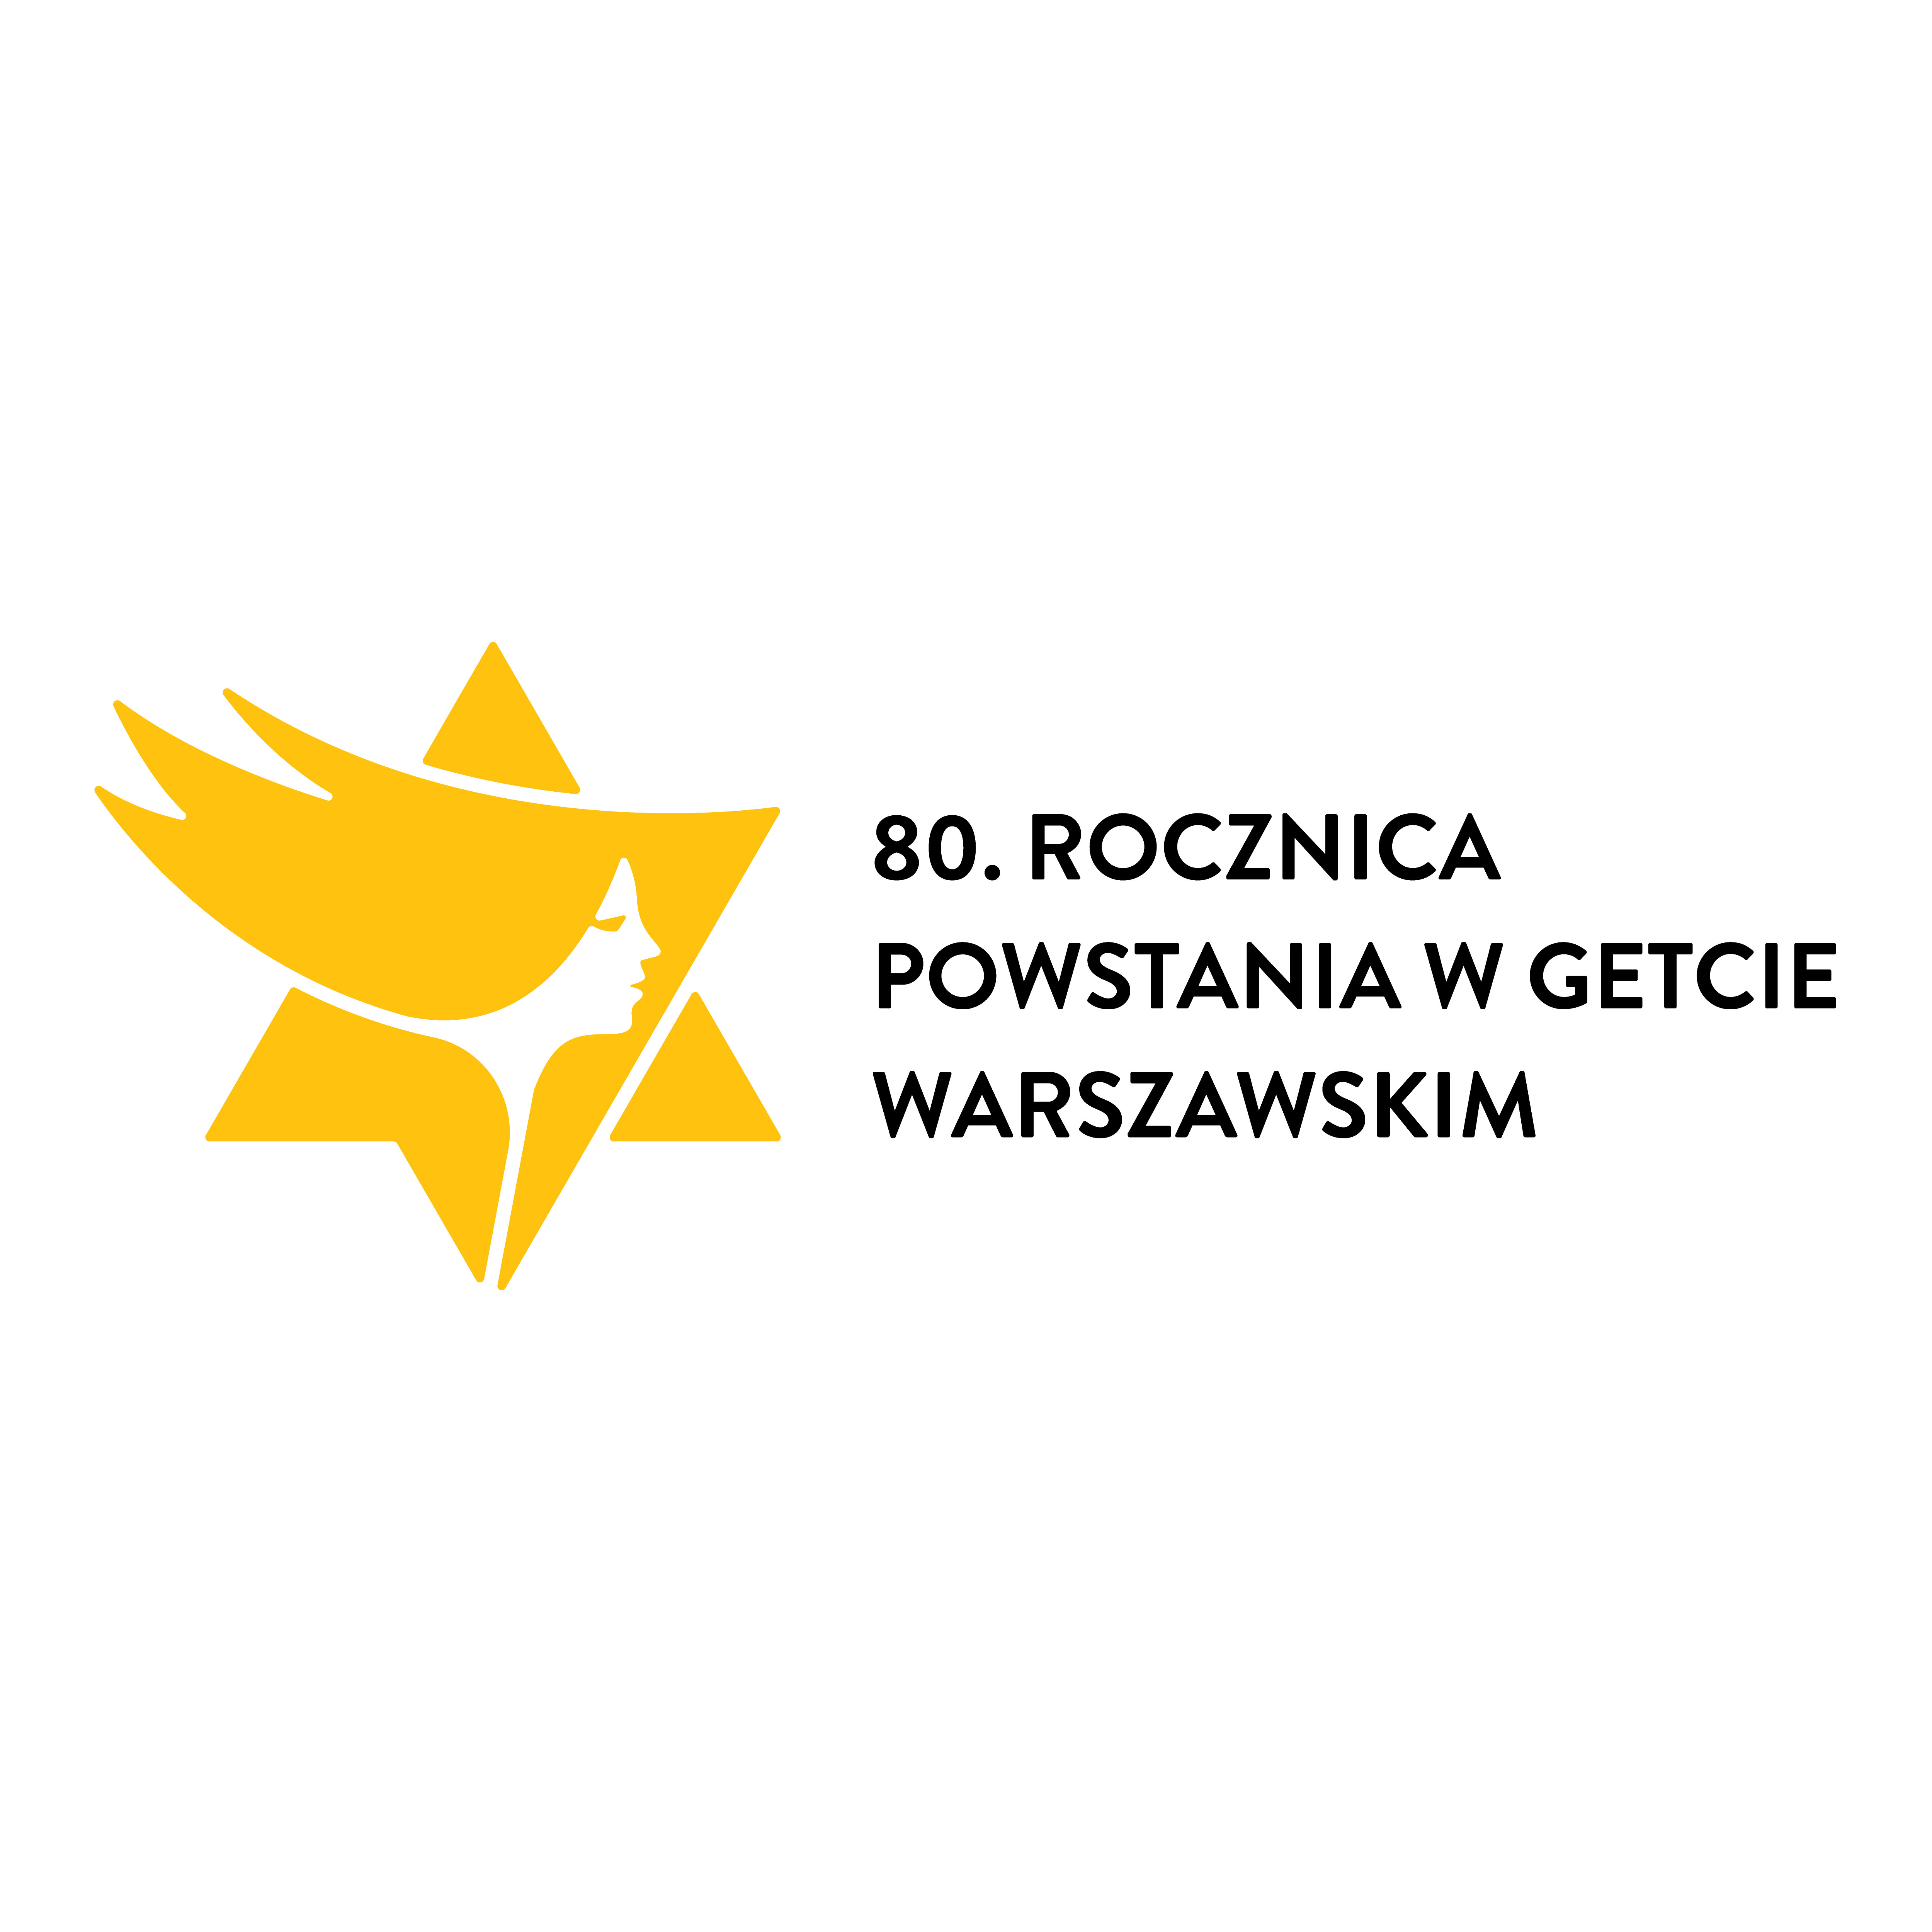 80th anniversary of the Warsaw Ghetto Uprising